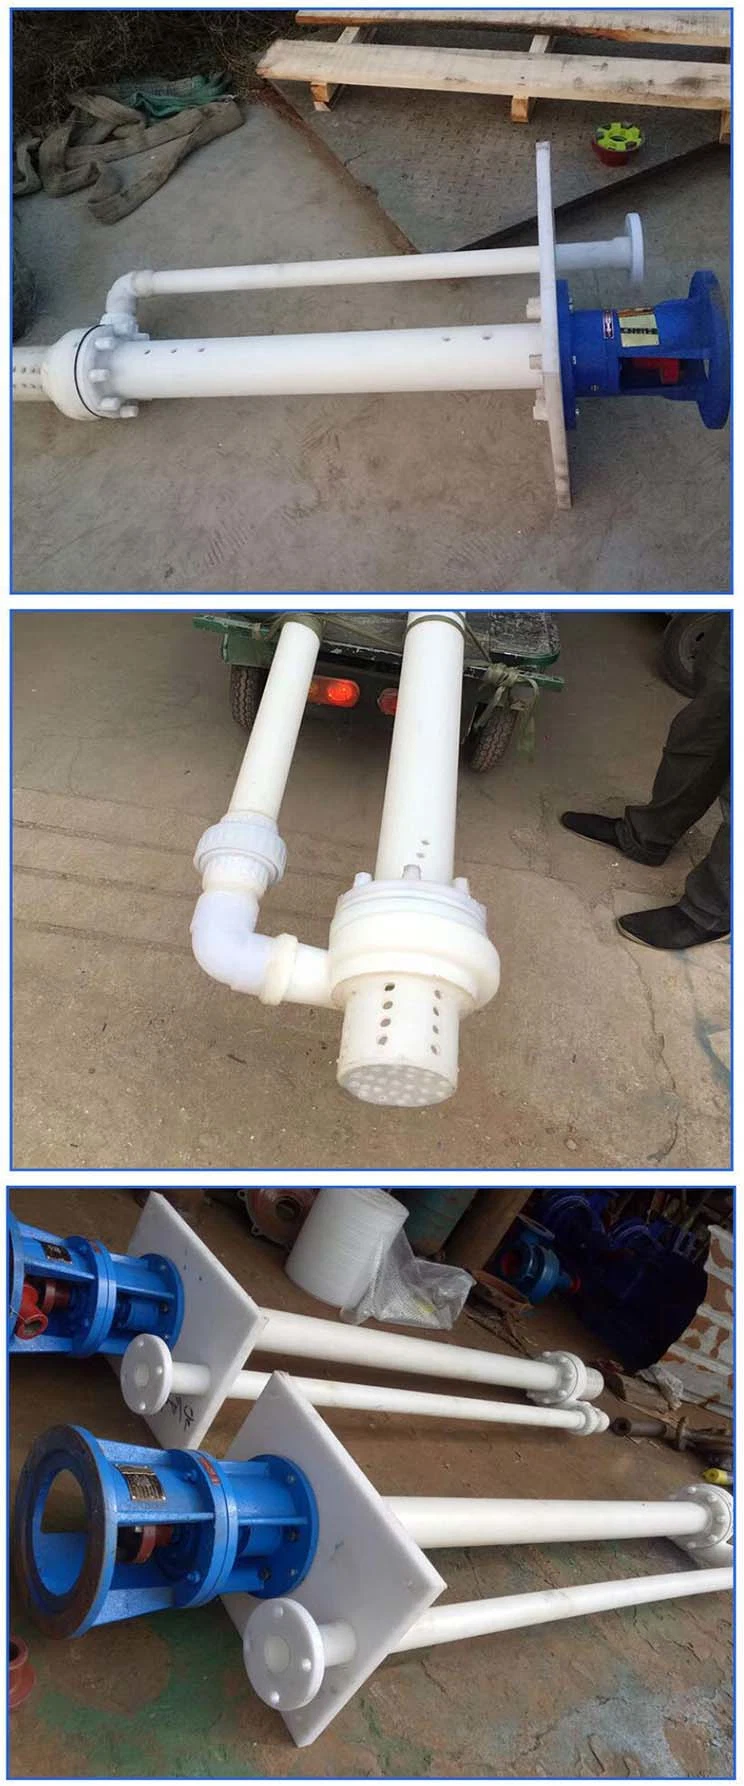 Fluoroplastic Corrosion-Resistant Liquid Centrifugal Pump For Conveying Strong Corrosive Medium